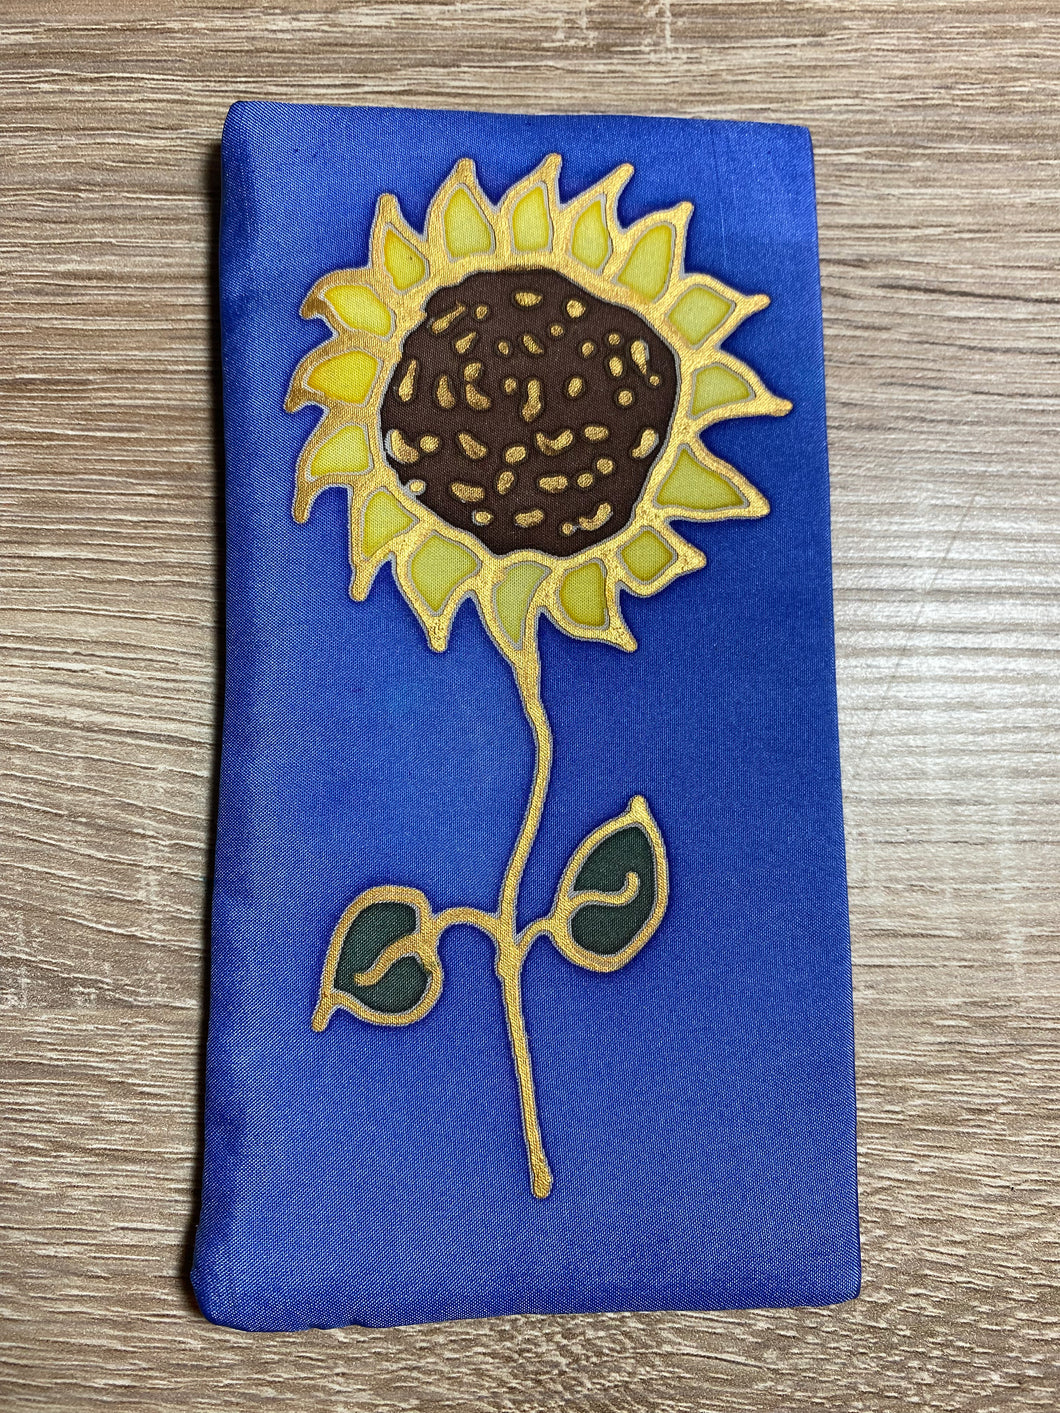 Sunflower Design Glasses Case in navy or blue Hand Painted Silk